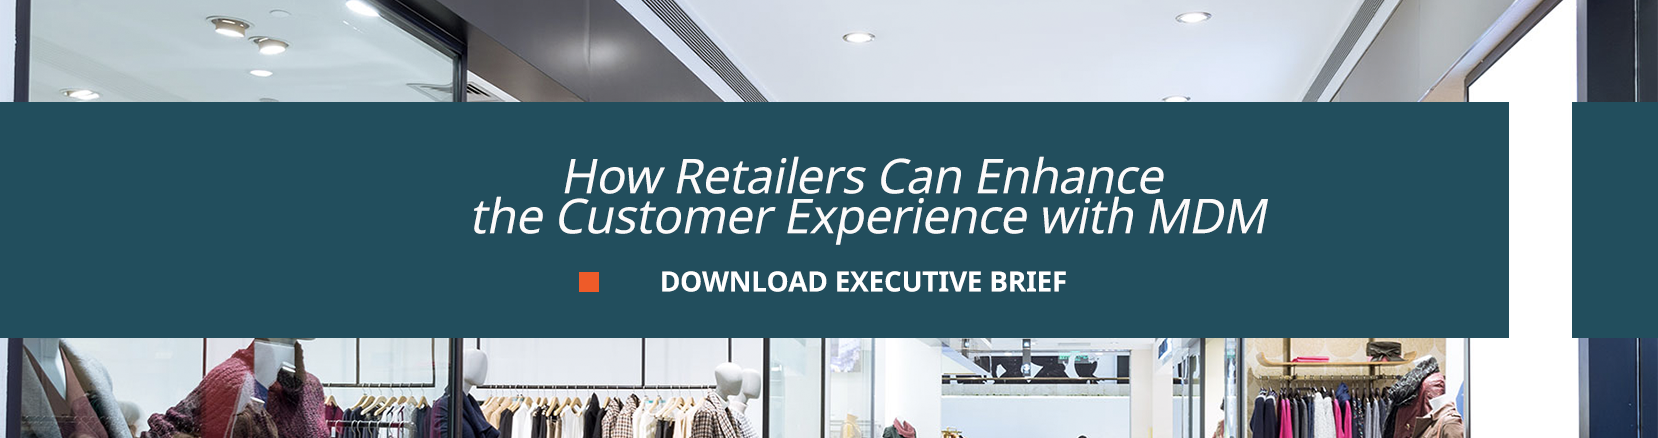 how retailers can enhance the customer experience with mdm